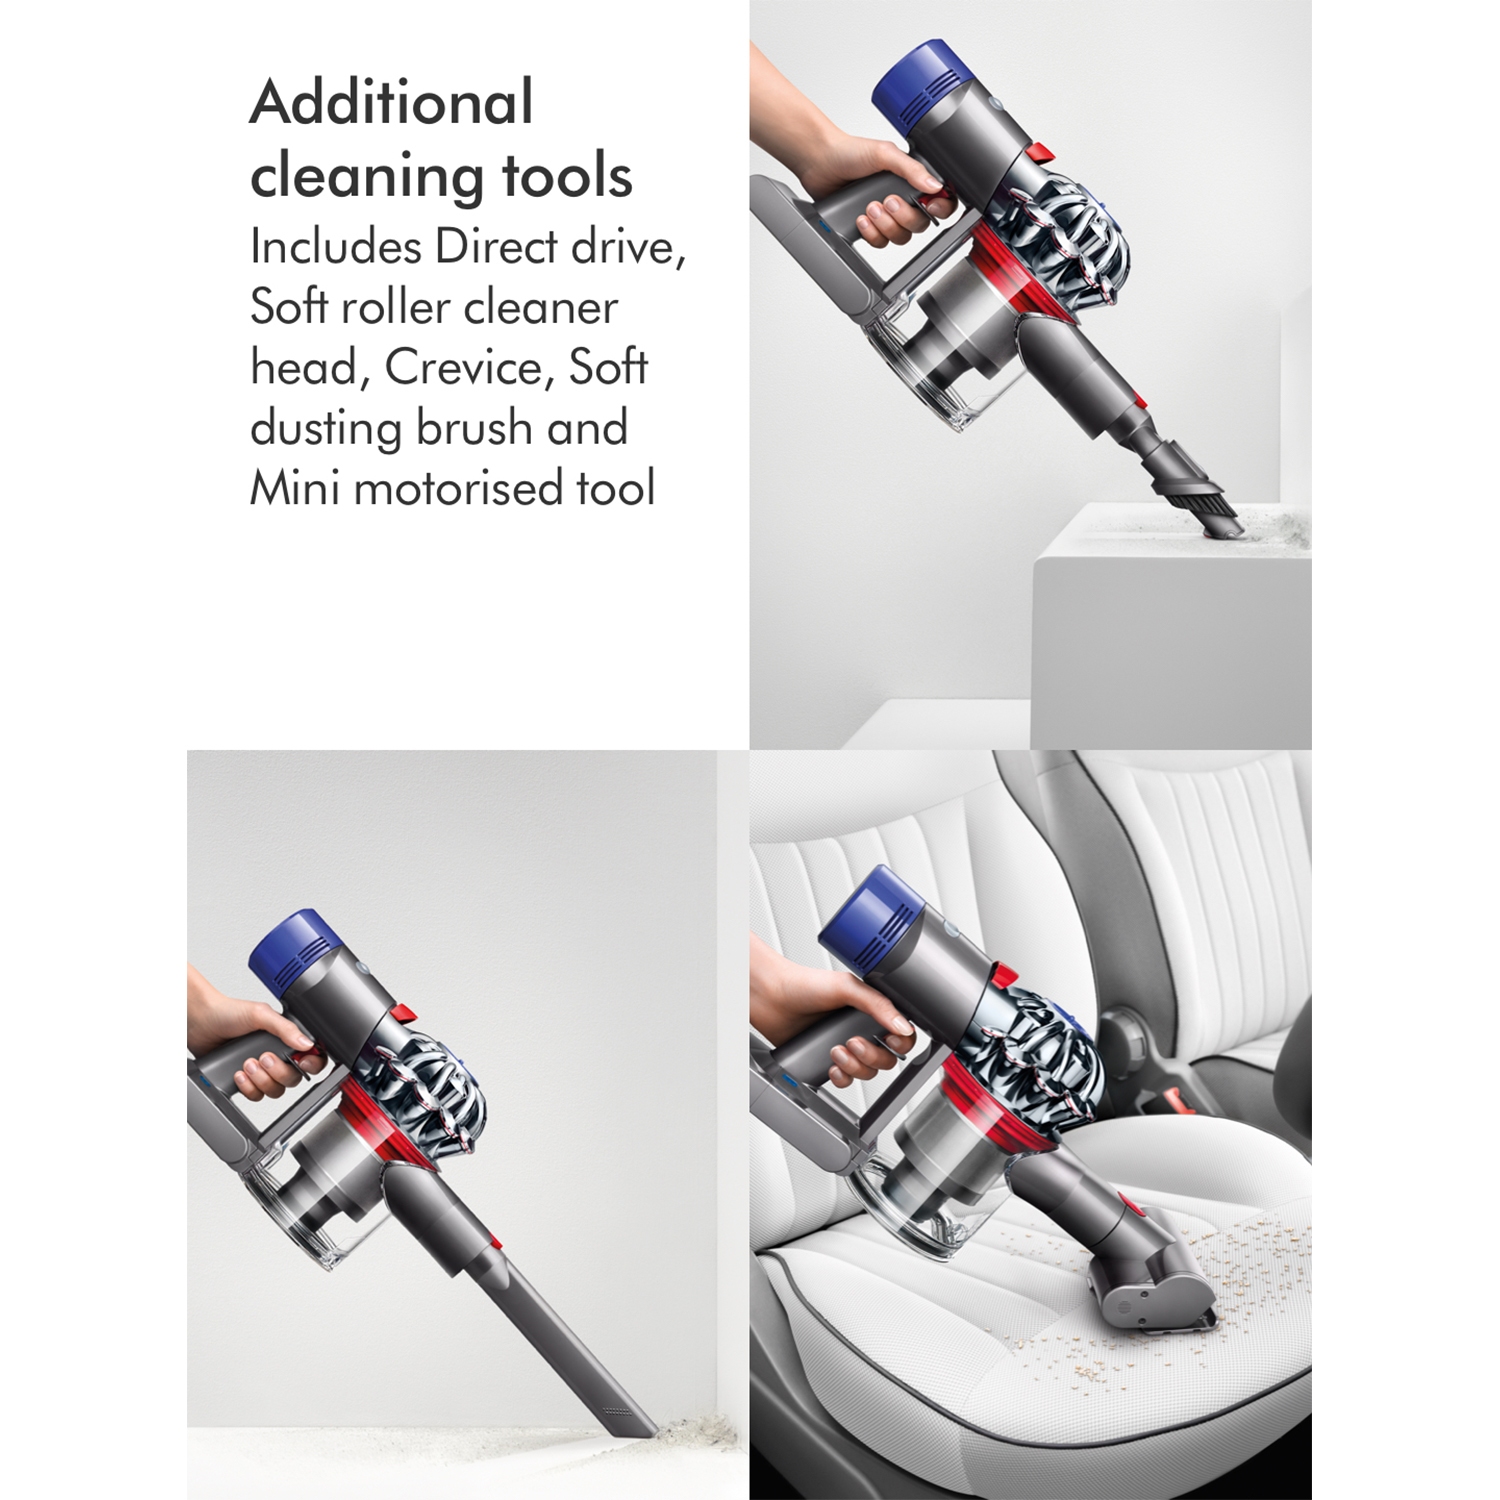 Dyson V7ABSOLUTE Cordless Vacuum Cleaner - 30 Minute Run Time - 7